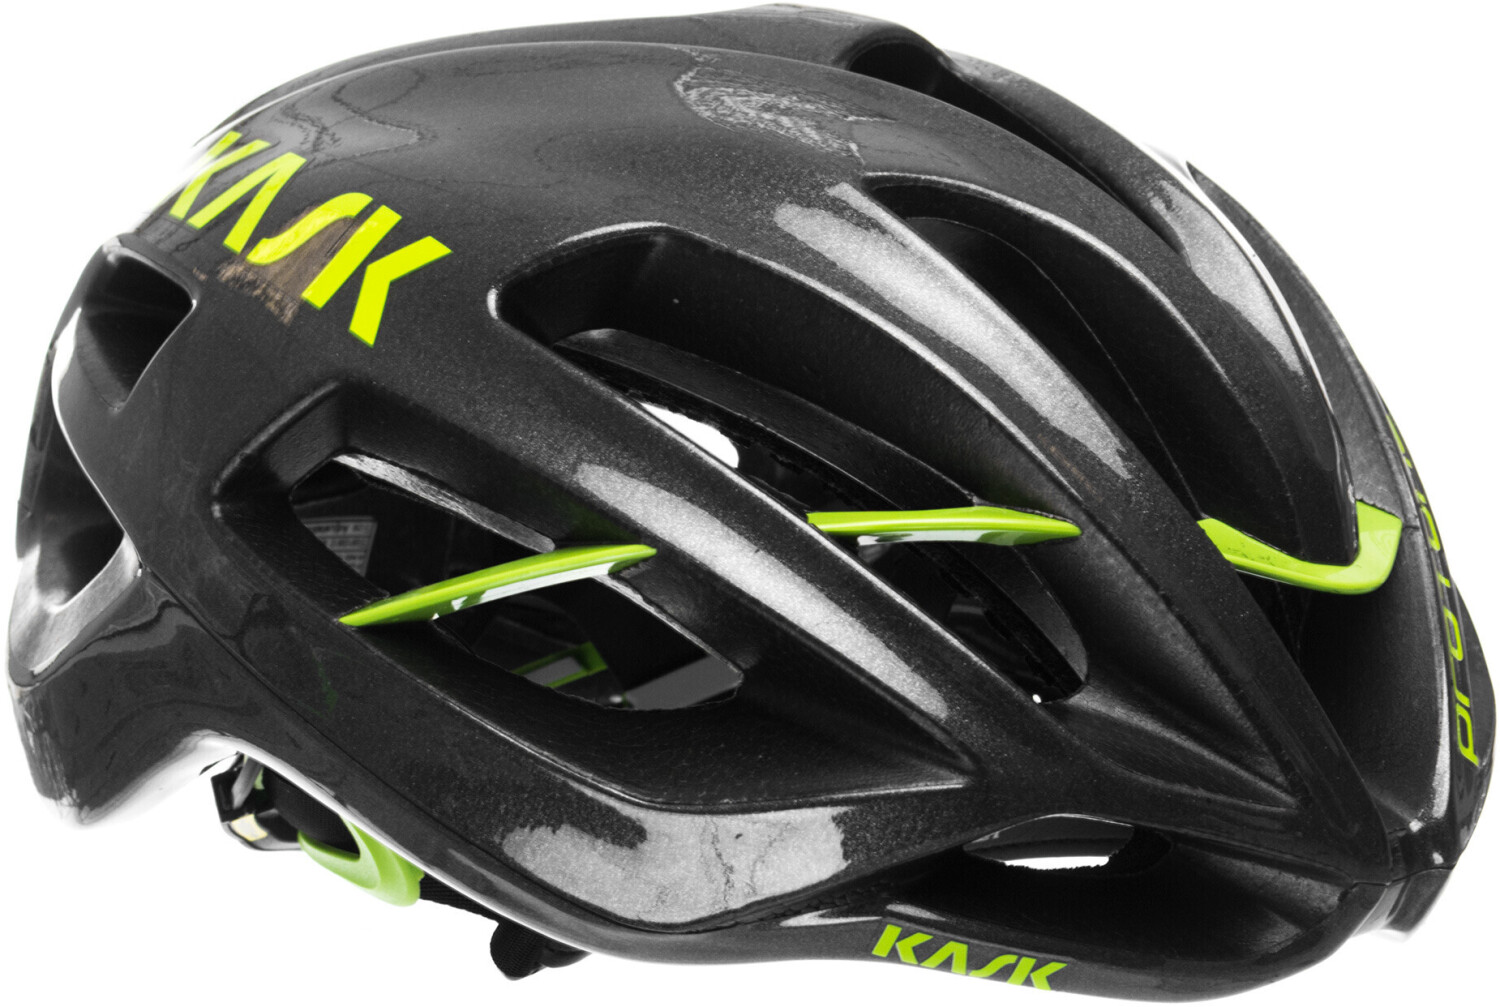 Buy Kask Protone green-black from £85.00 (Today) – Best Deals on 